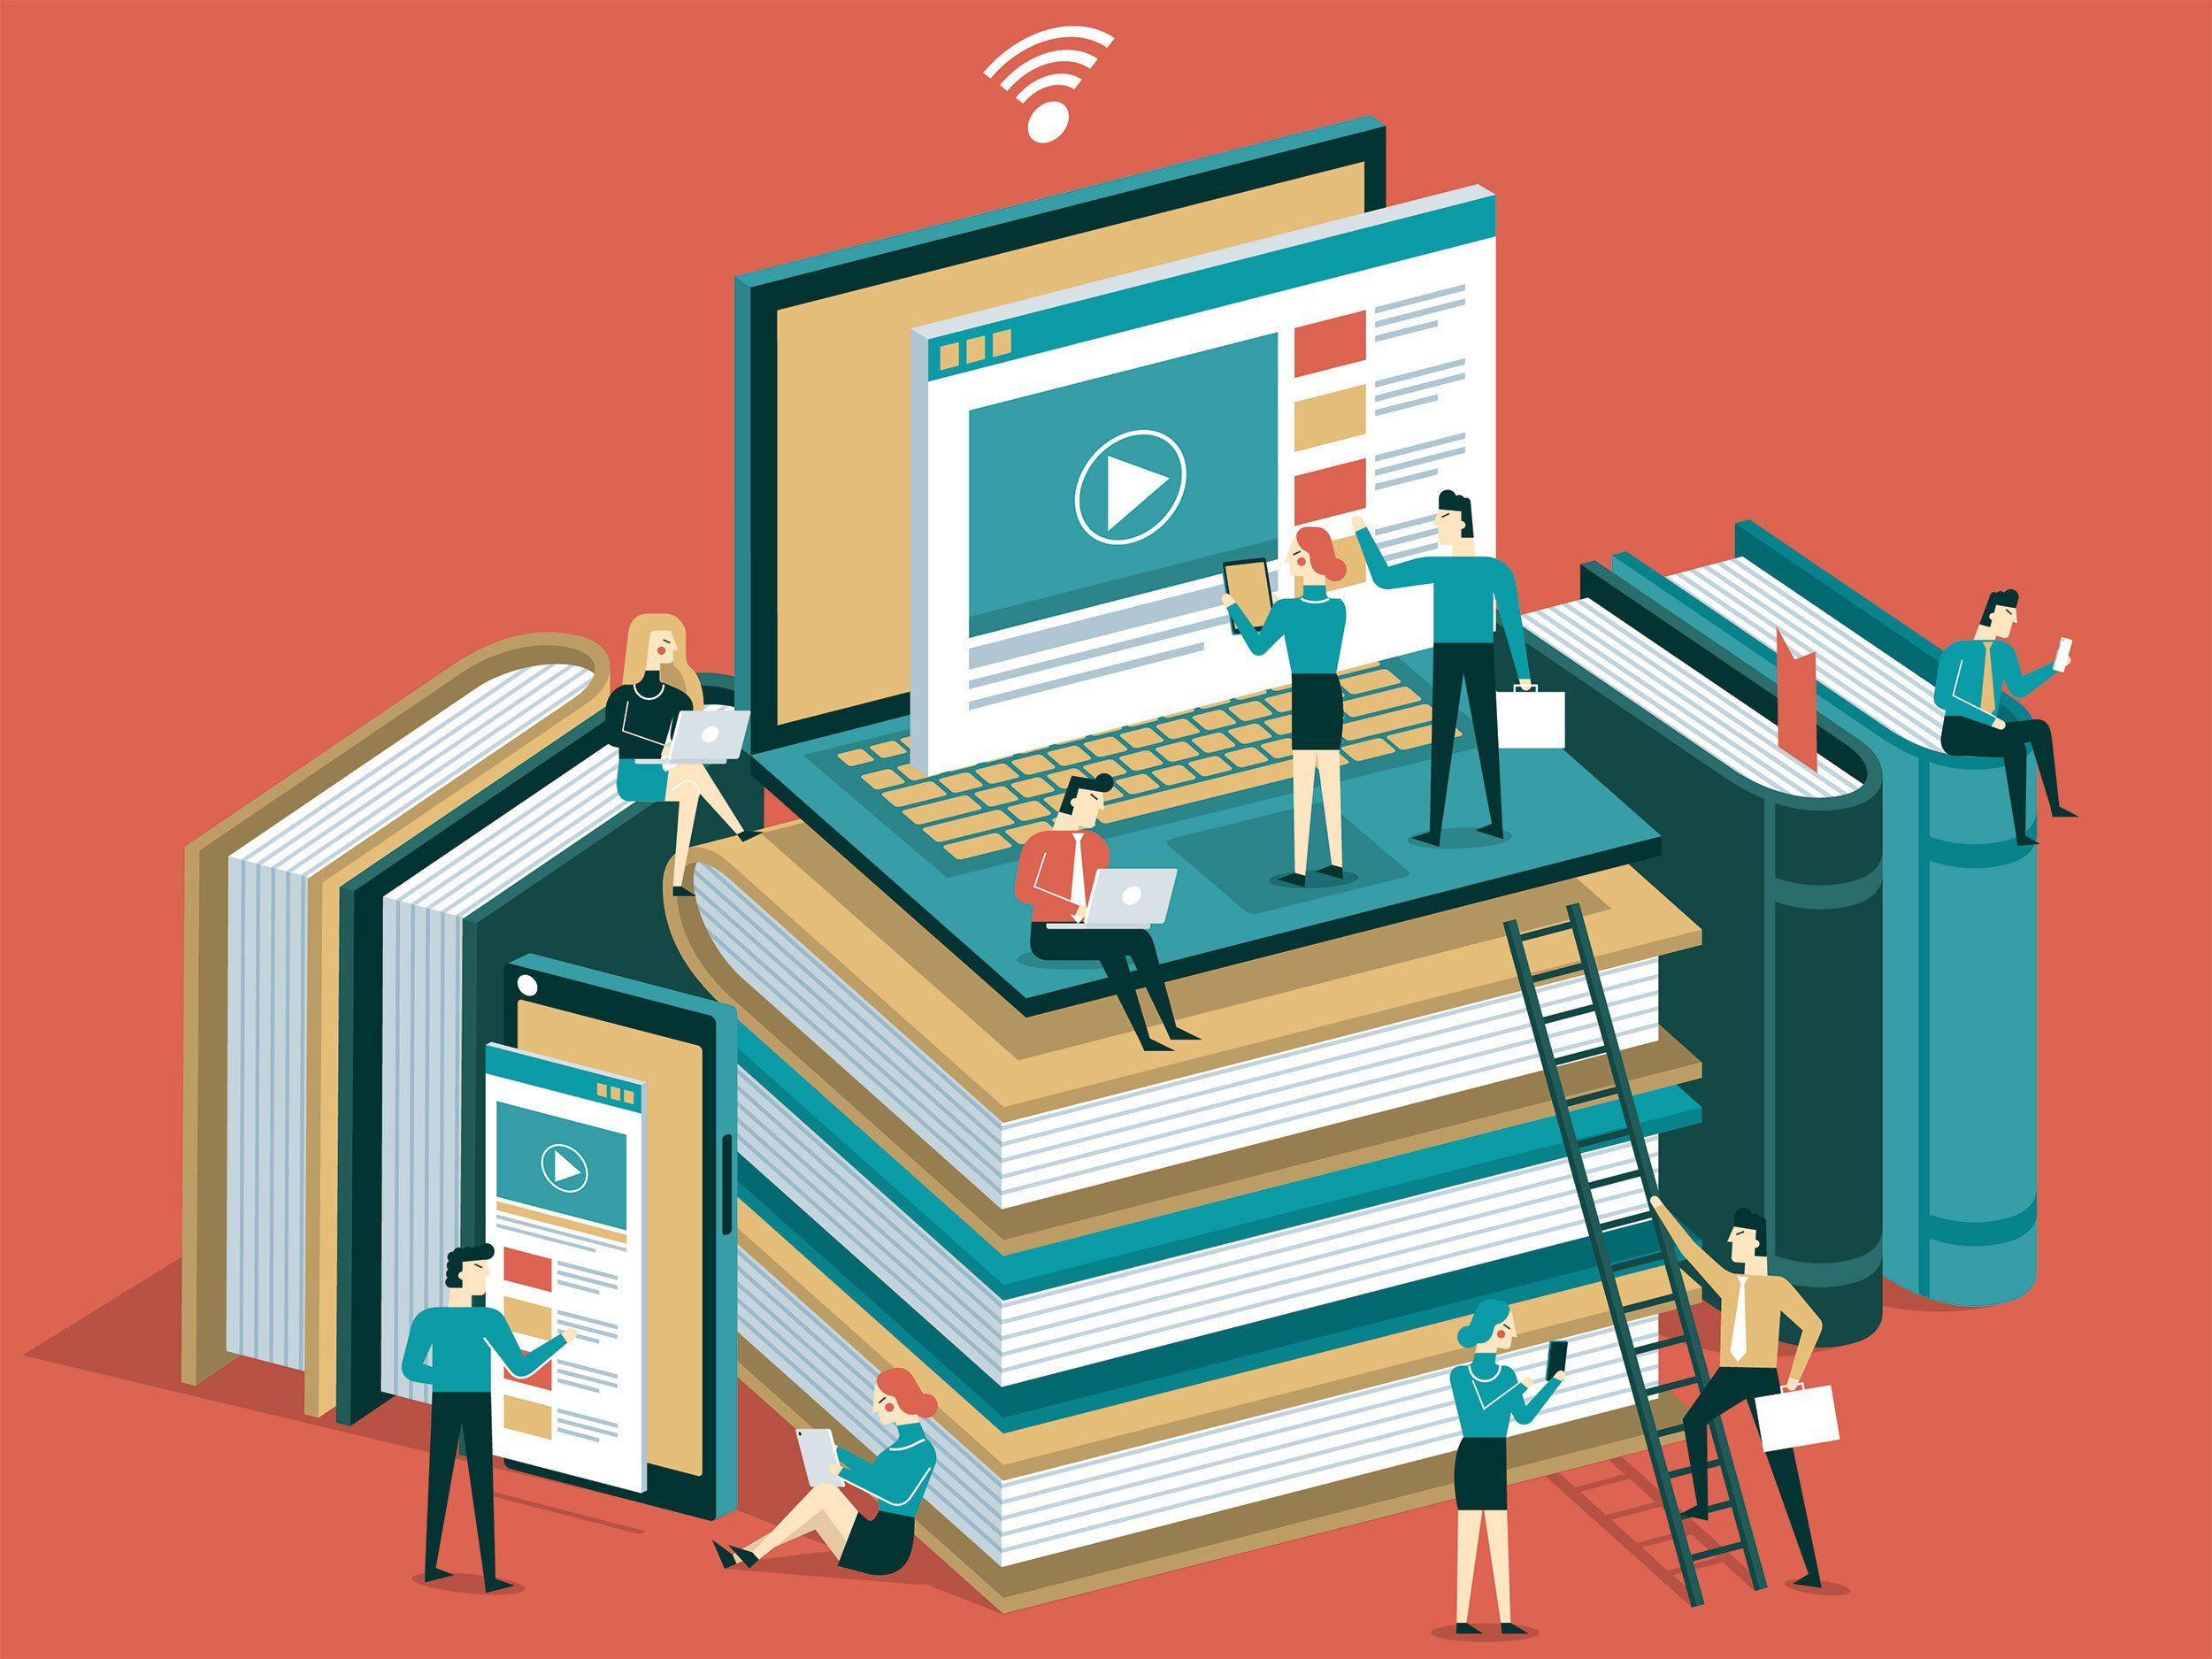 illustration of life-size stack of books with a laptop on top and people sitting on books with phones and laptops 